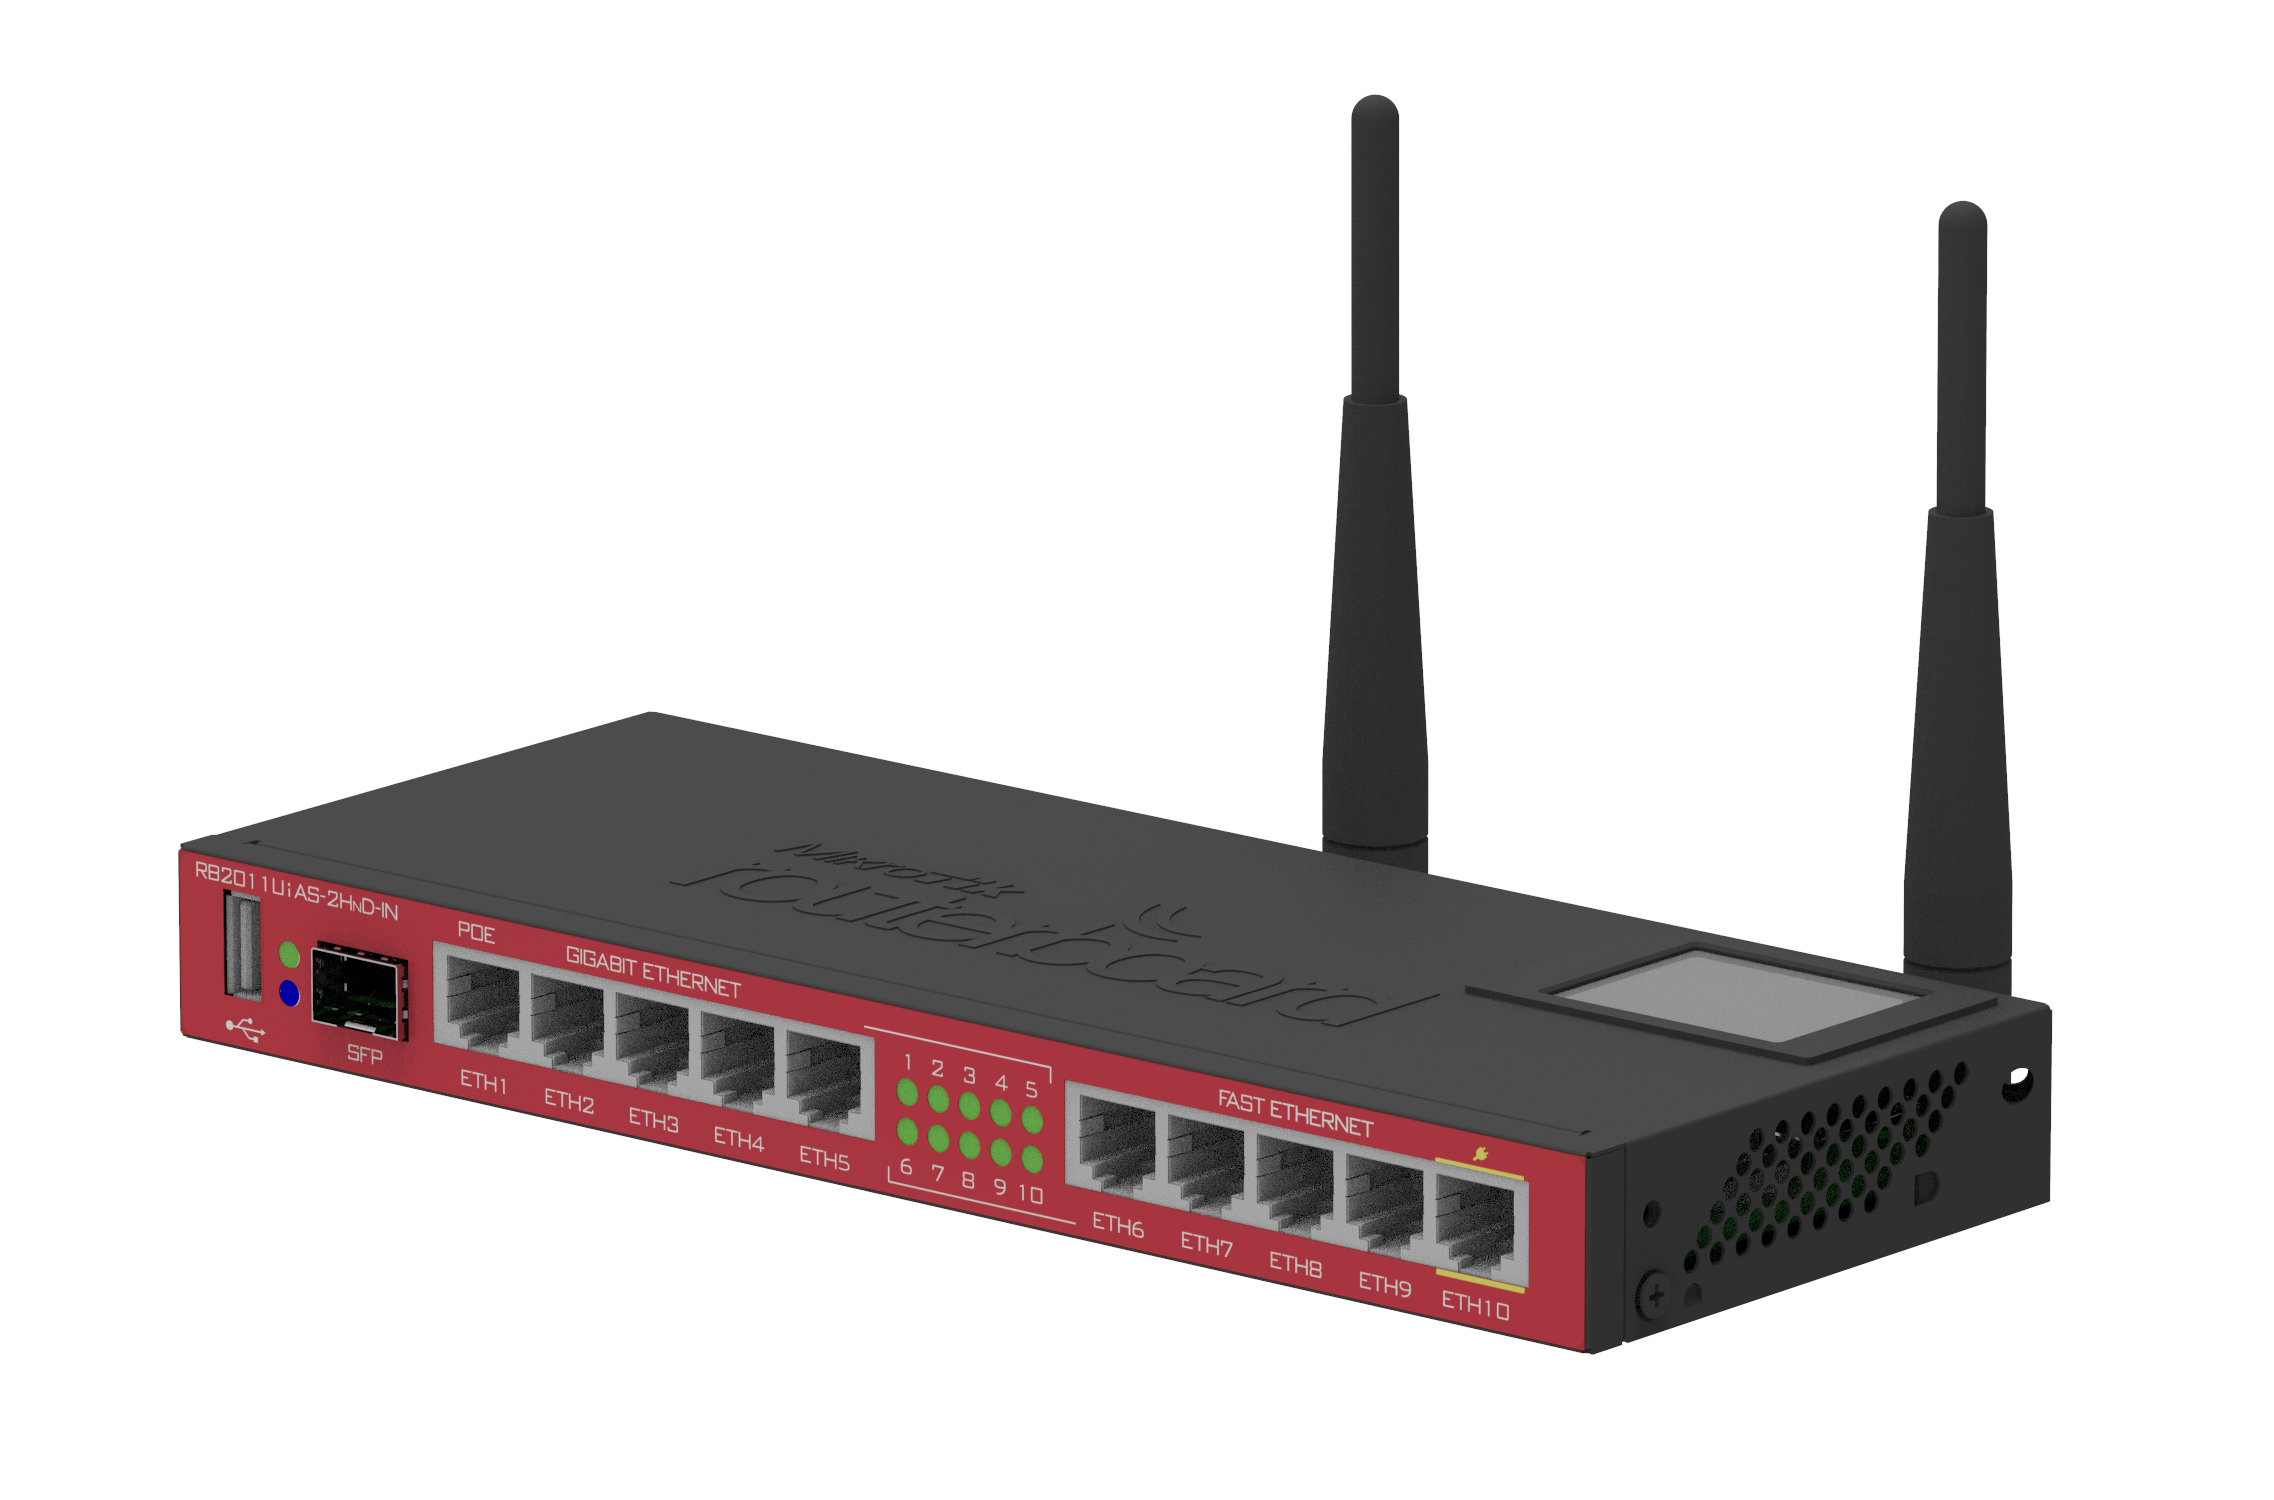 Router Mikrotik Rb2011uias-2hnd-in 